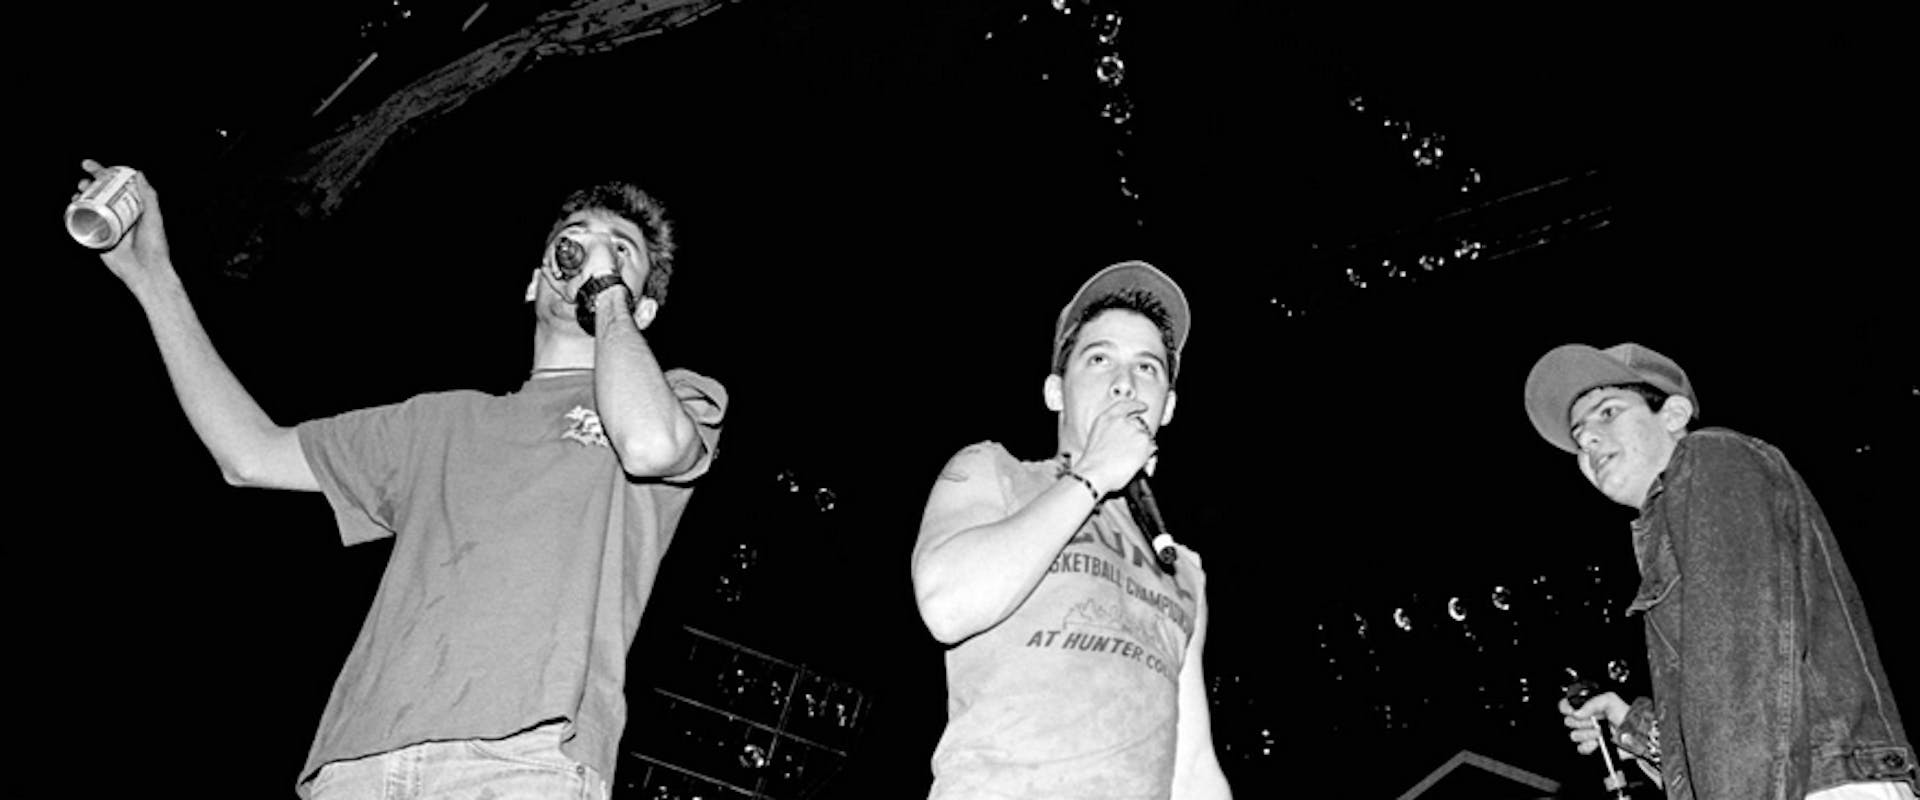 (L-R) American rapper, bass player and filmmaker Adam "MCA" Yauch (1964 - 2012) and rapper, guitarist and actor Adam "Ad-Rock" Horovitz and rapper, musician, and music producer Michael "Mike D" Diamond, of the American rap rock group Beastie Boys, sing on stage during the 1987 Licensed to Ill tour at the Centrum in Worcester in Worcester, Massachusetts on April 9, 1987. 